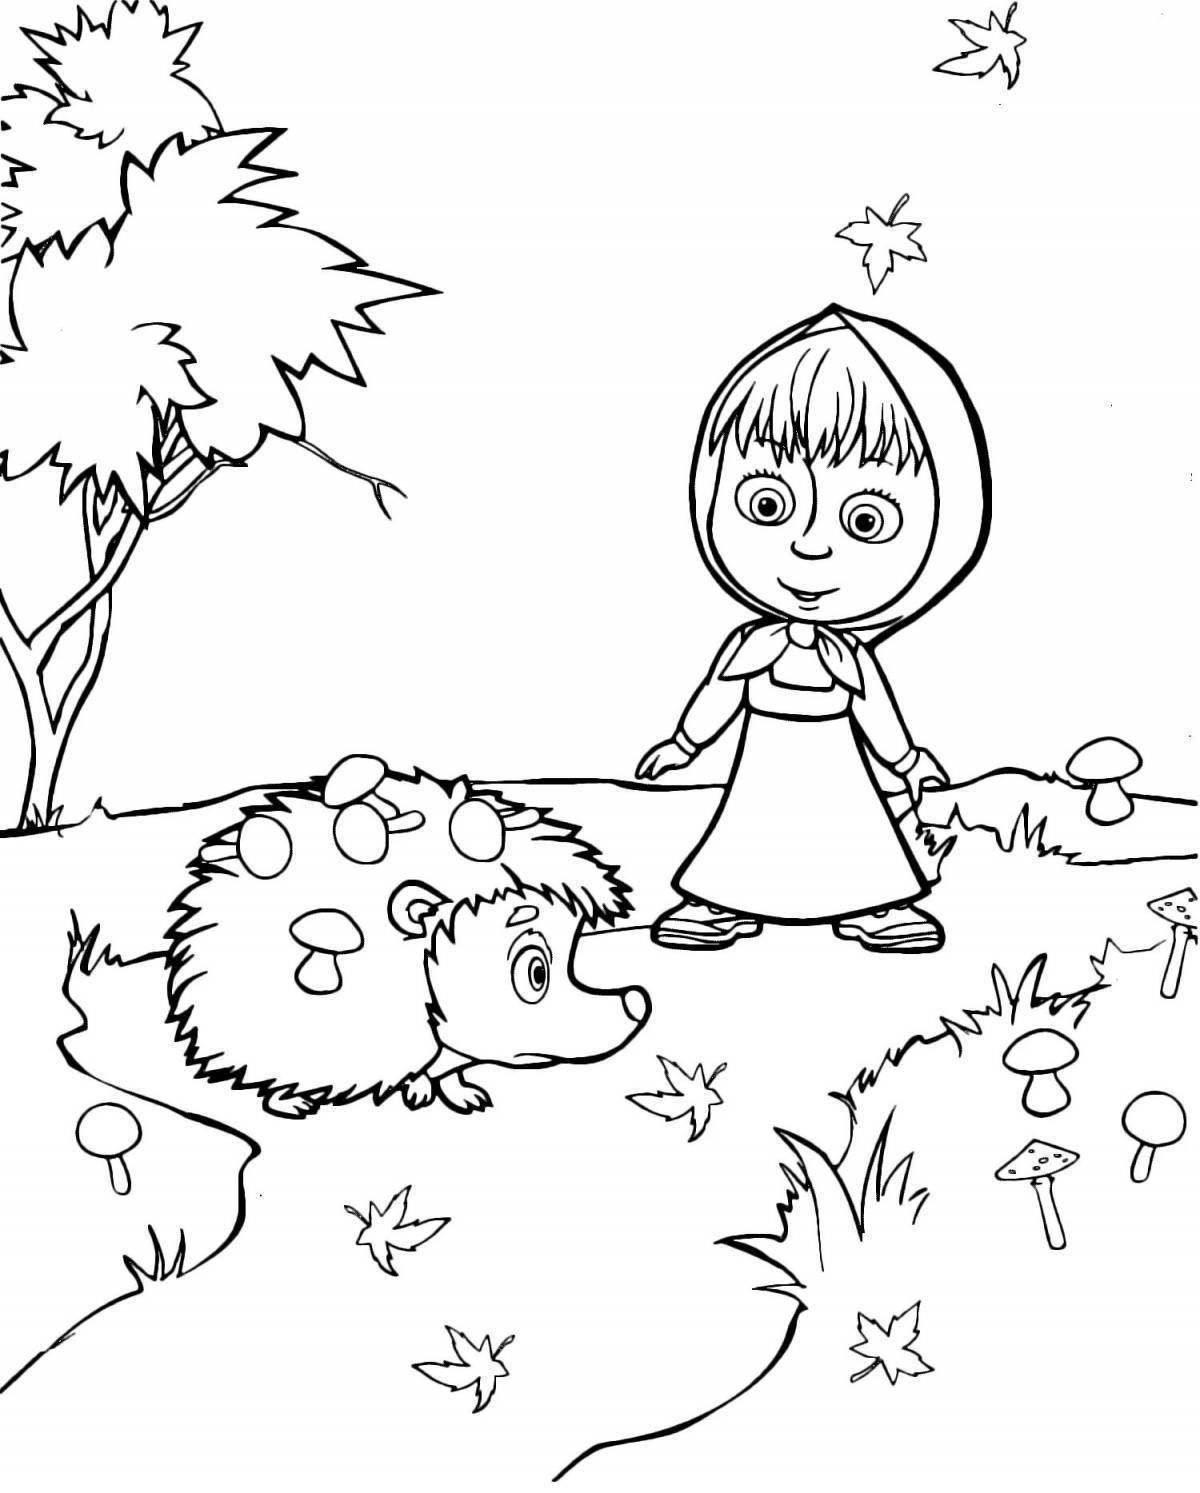 Magic Masha and the bear coloring pages for kids